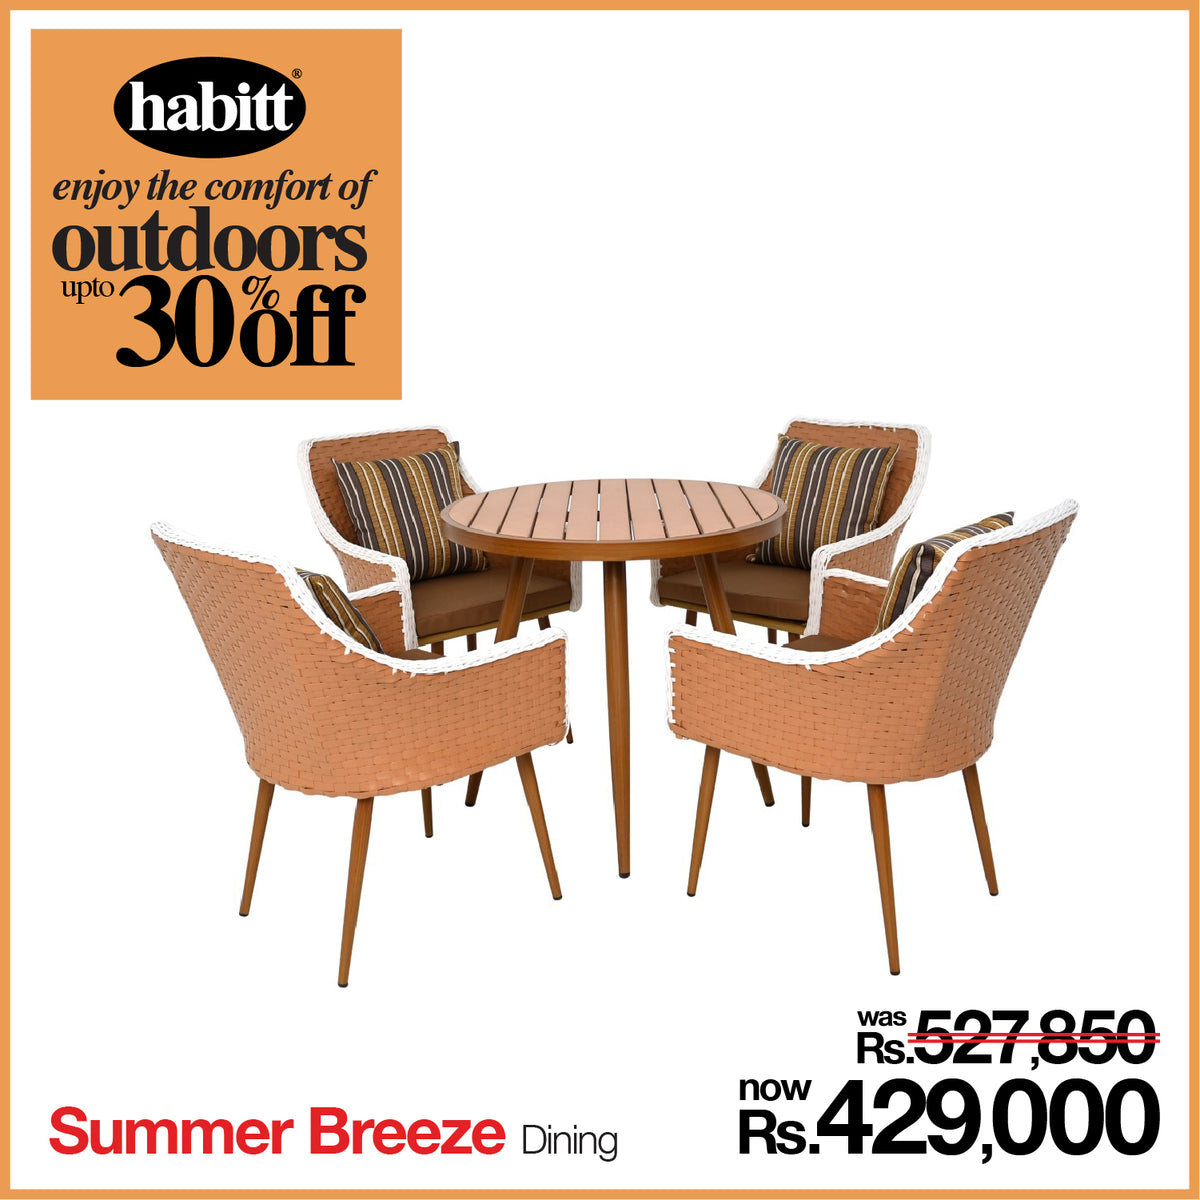 Summer Breeze 4 person Dinning Table